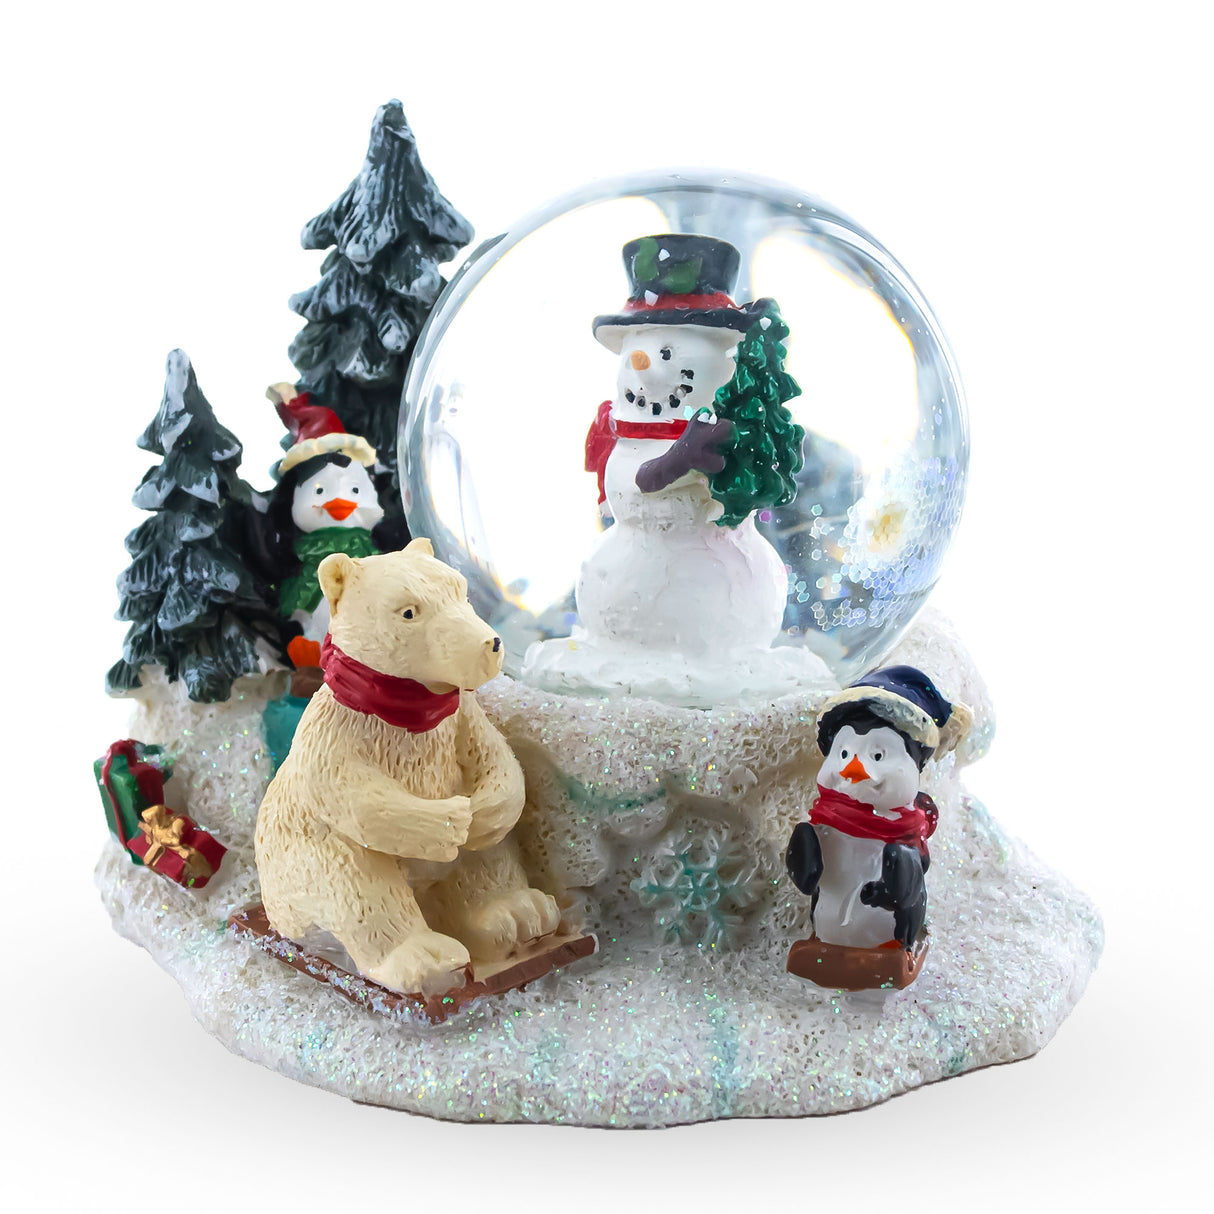 Resin Arctic Animals Mini Water Snow Globe: Snowman, Polar Bear, and Penguins in White color Round